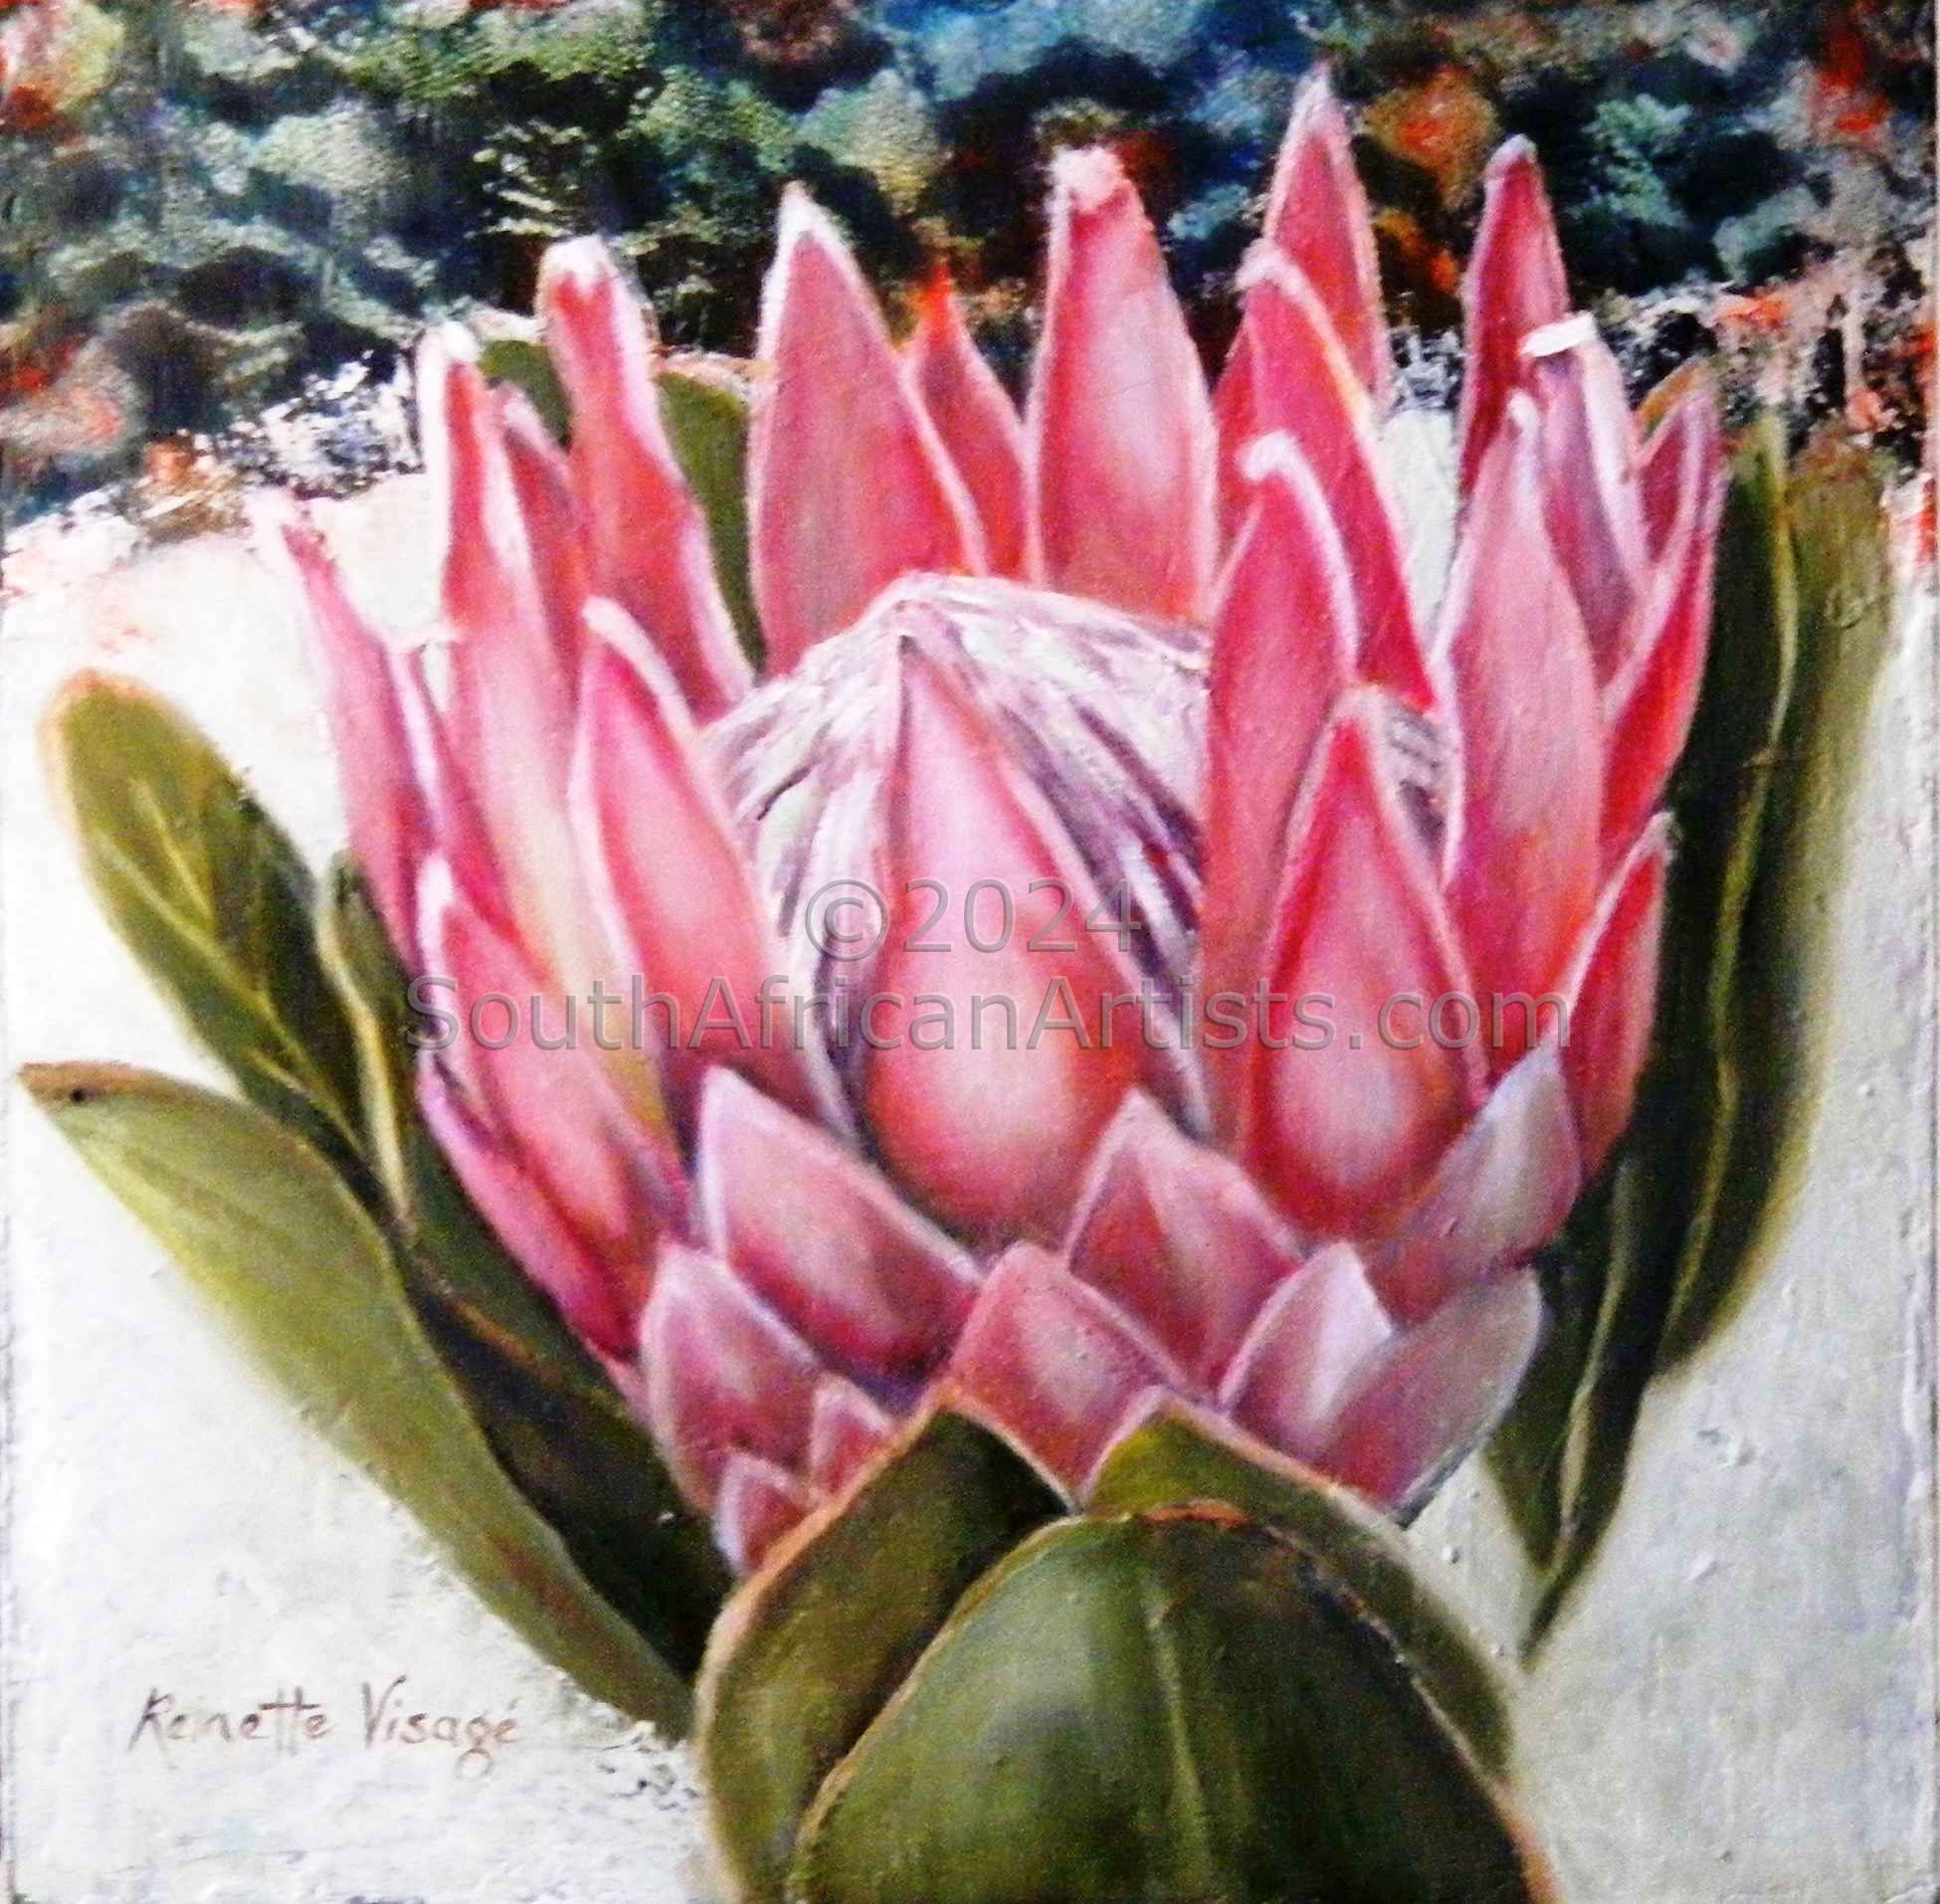 Pin Protea, National Flower s.A.